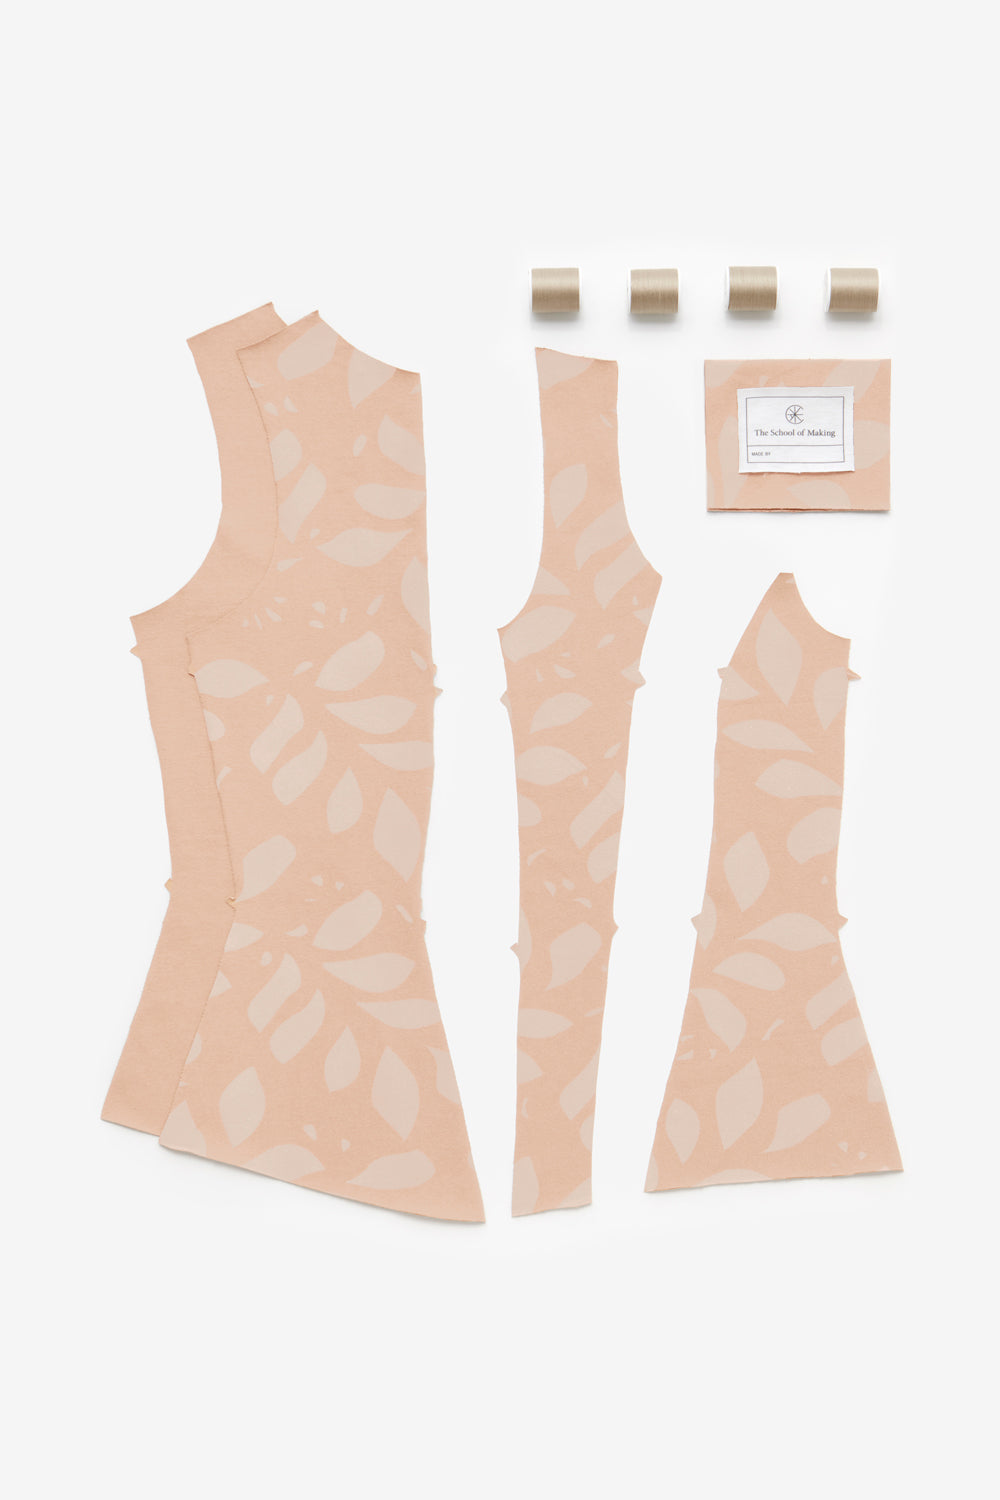 The Corset Kit in Ballet with Bloomers stencil.